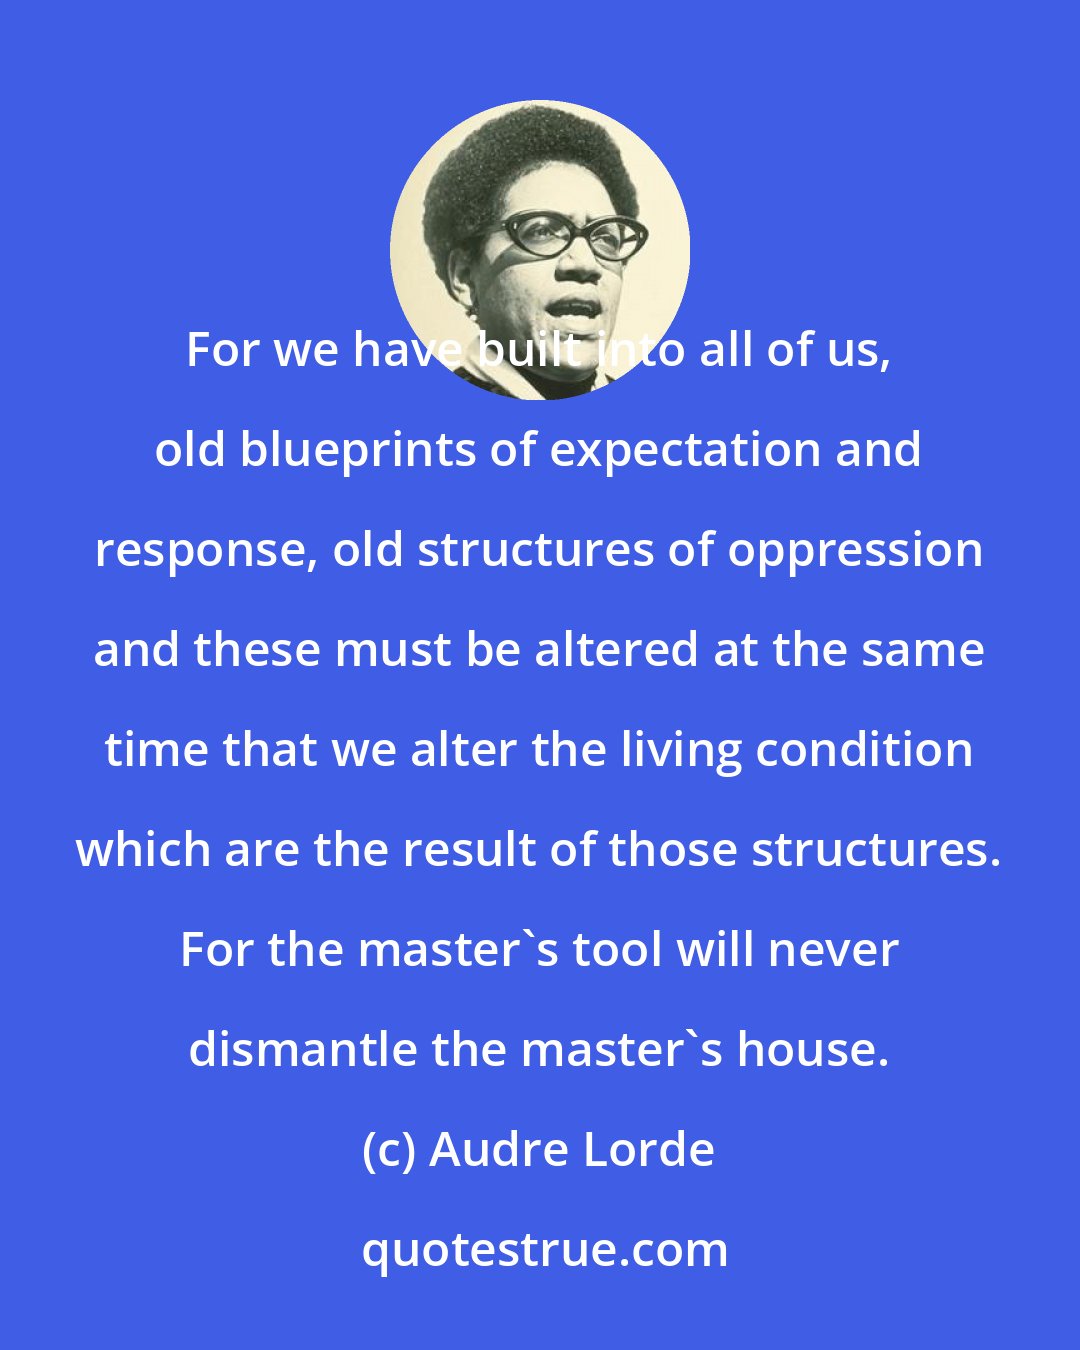 Audre Lorde: For we have built into all of us, old blueprints of expectation and response, old structures of oppression and these must be altered at the same time that we alter the living condition which are the result of those structures. For the master's tool will never dismantle the master's house.